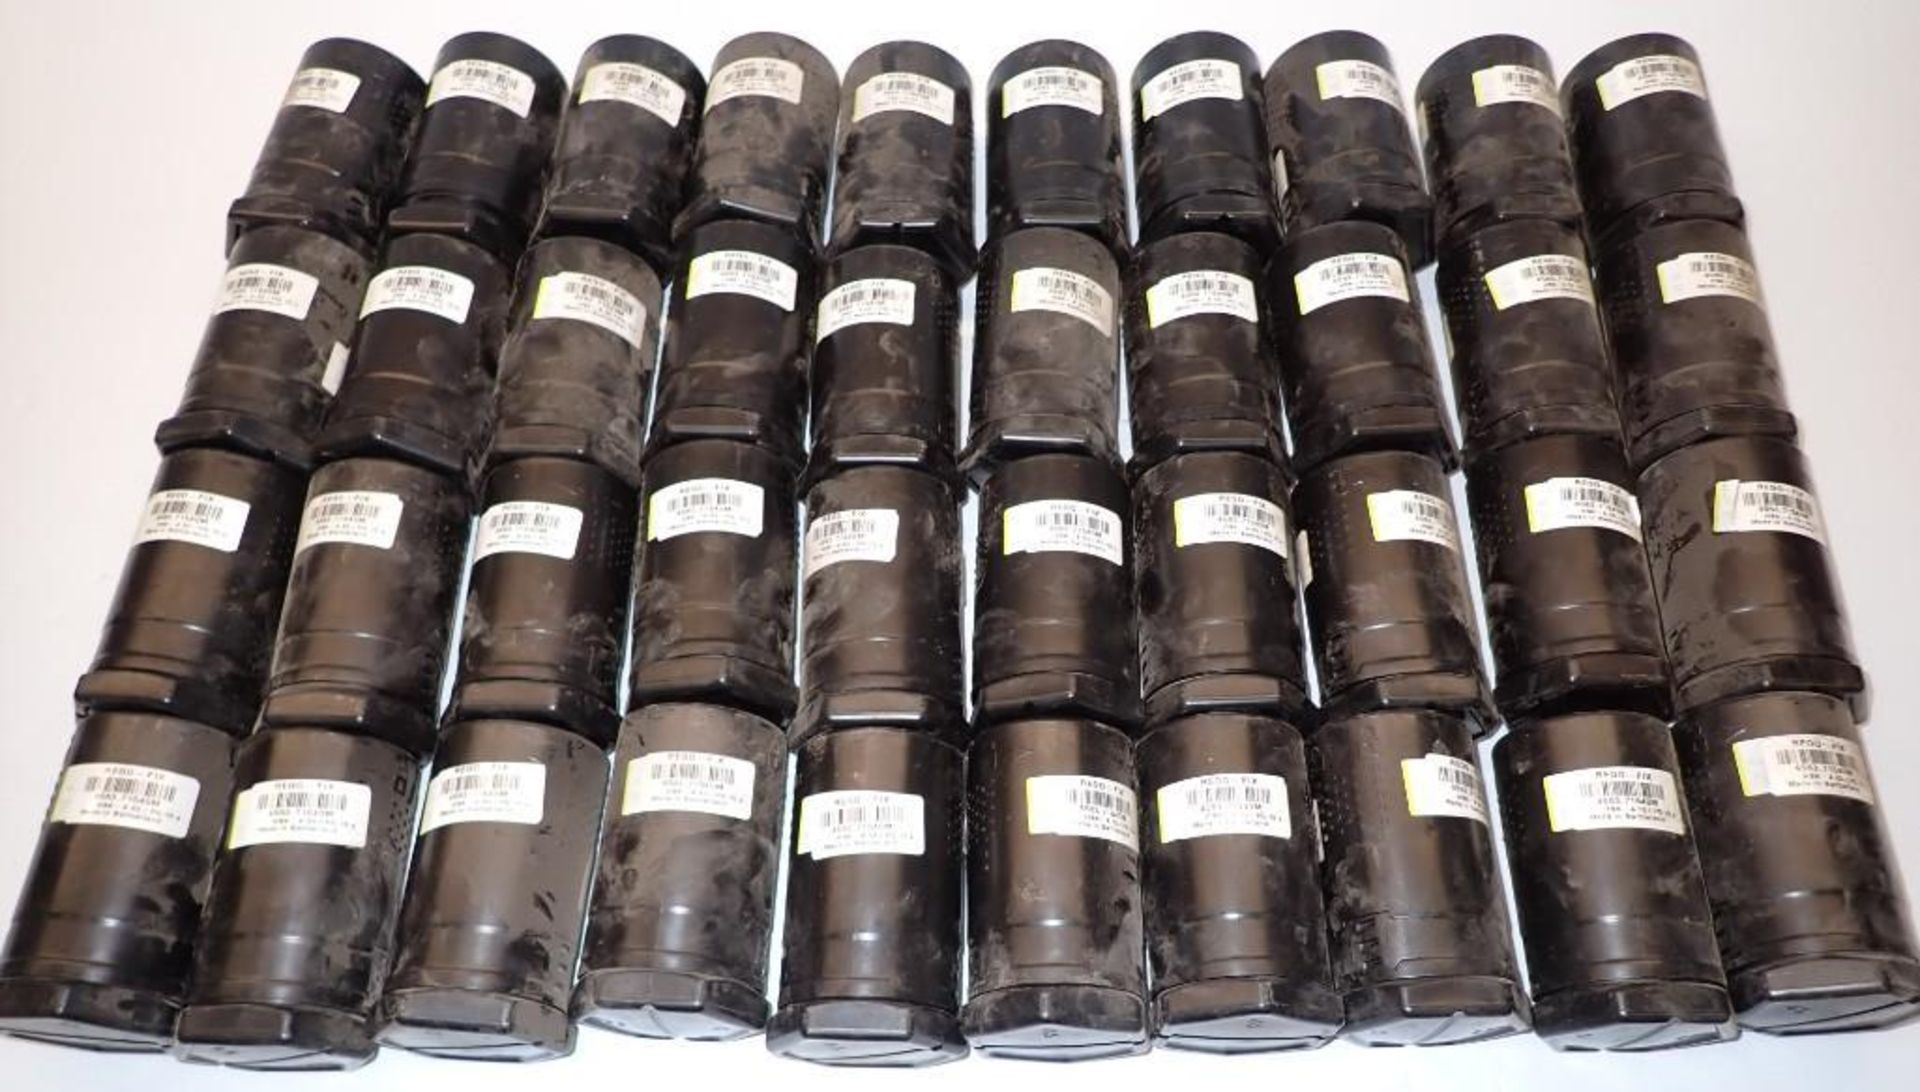 Lot of HSK A 63 #4563.71540M Holders